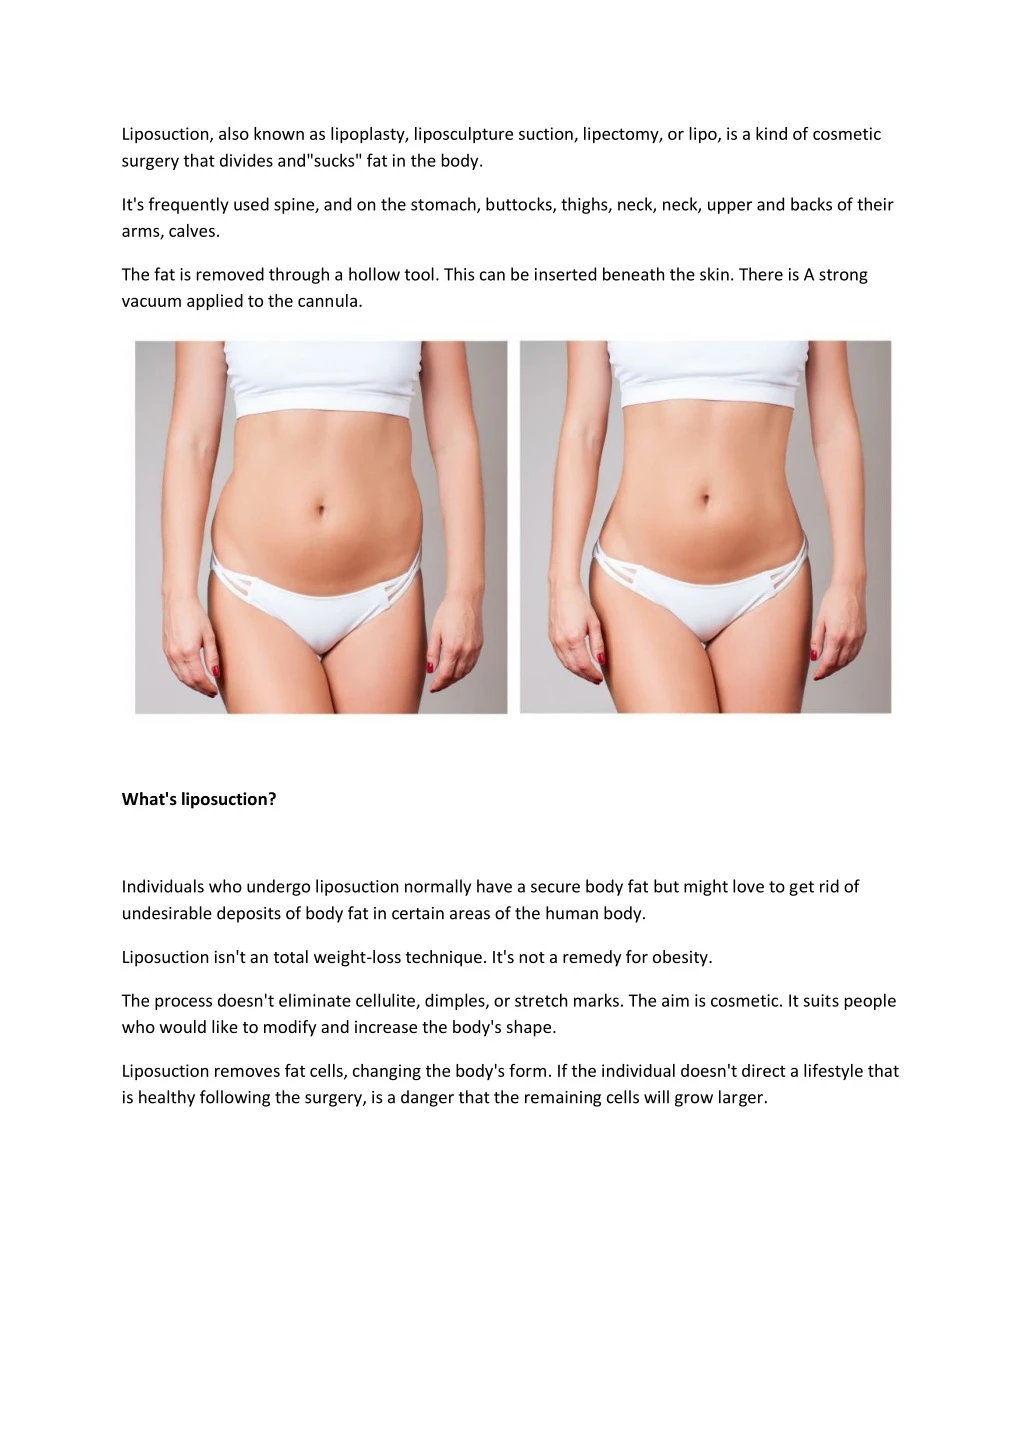 liposuction also known as lipoplasty